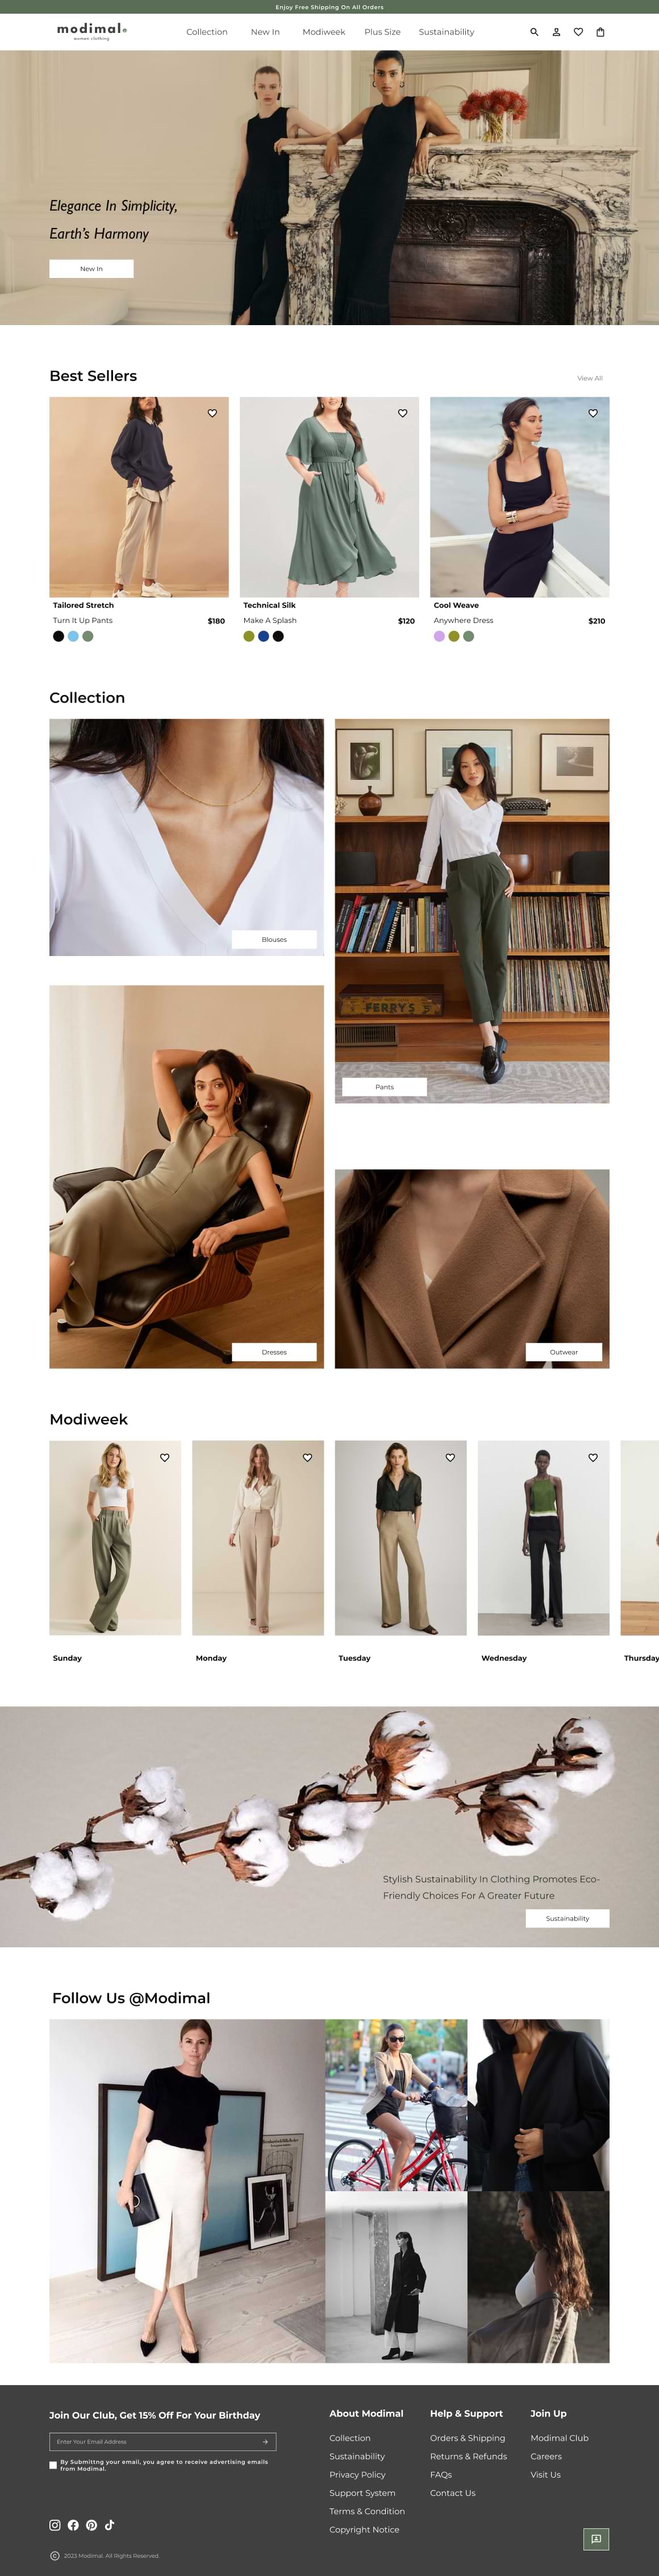 Free Design Template for Woman Clothing Store - Freebiesbug